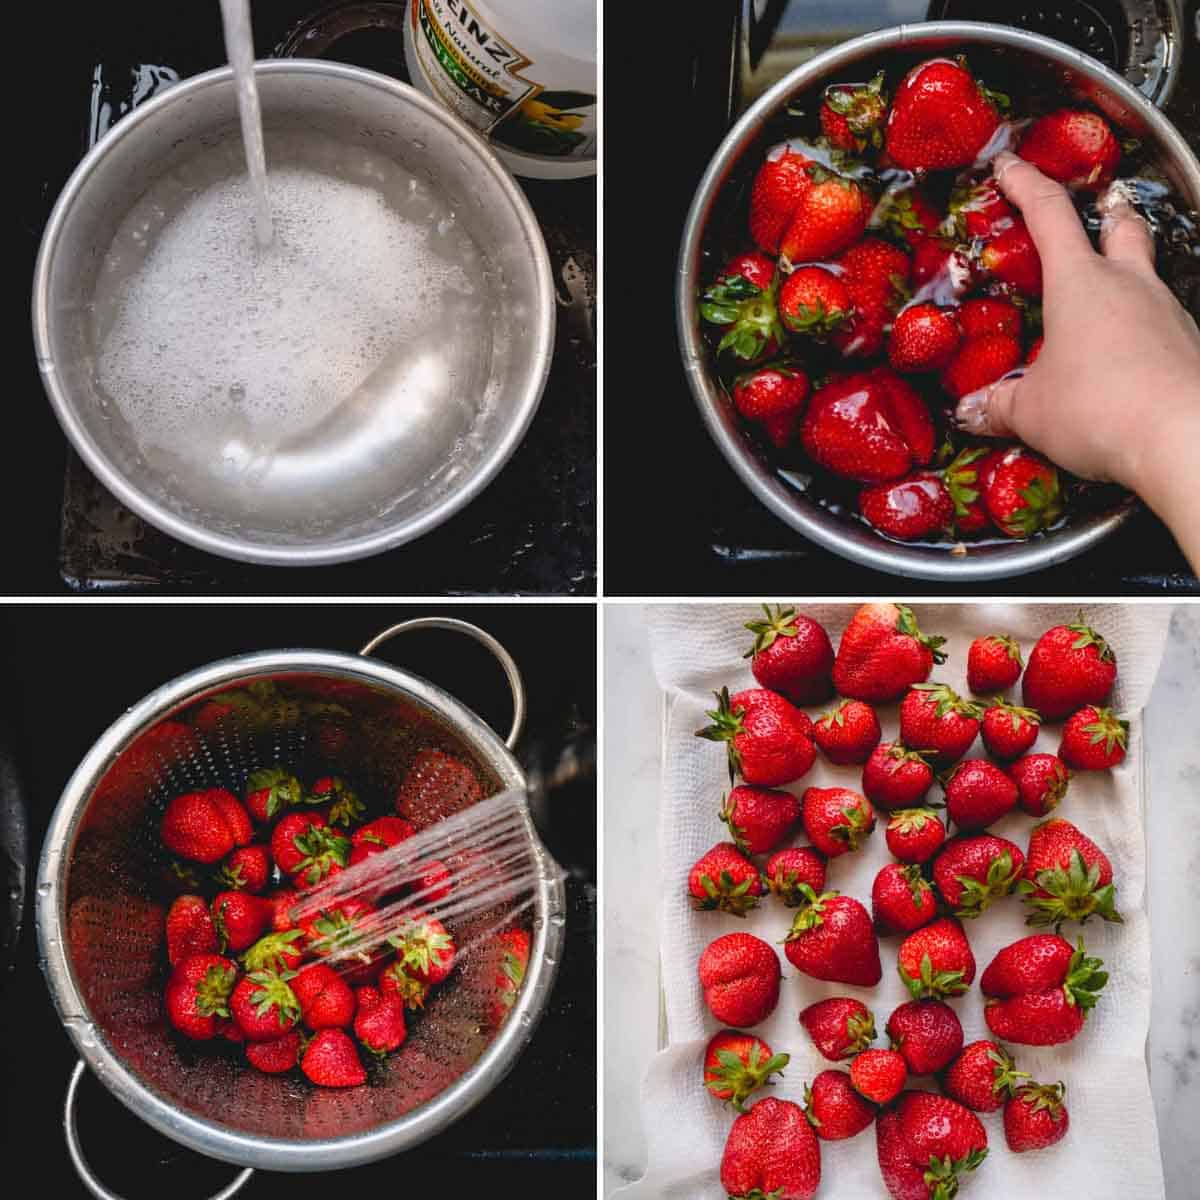 Four images showing the process of how to clean strawberries with water and vinegar, rinse them off, and dry them on a paper towel.